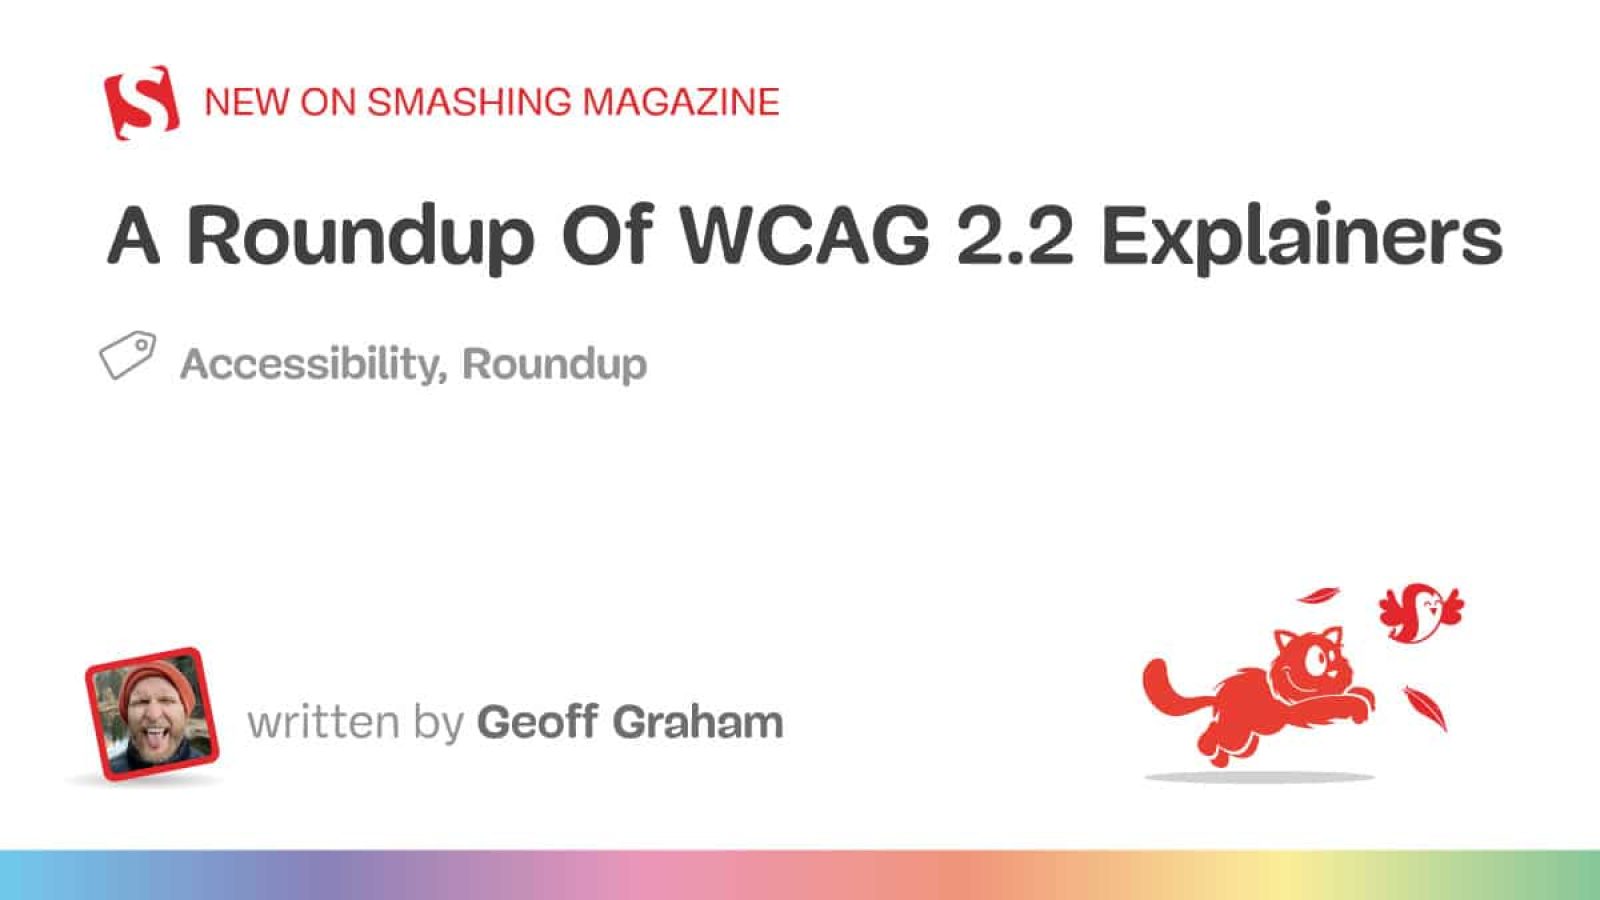 A Roundup Of WCAG 2.2 Explainers